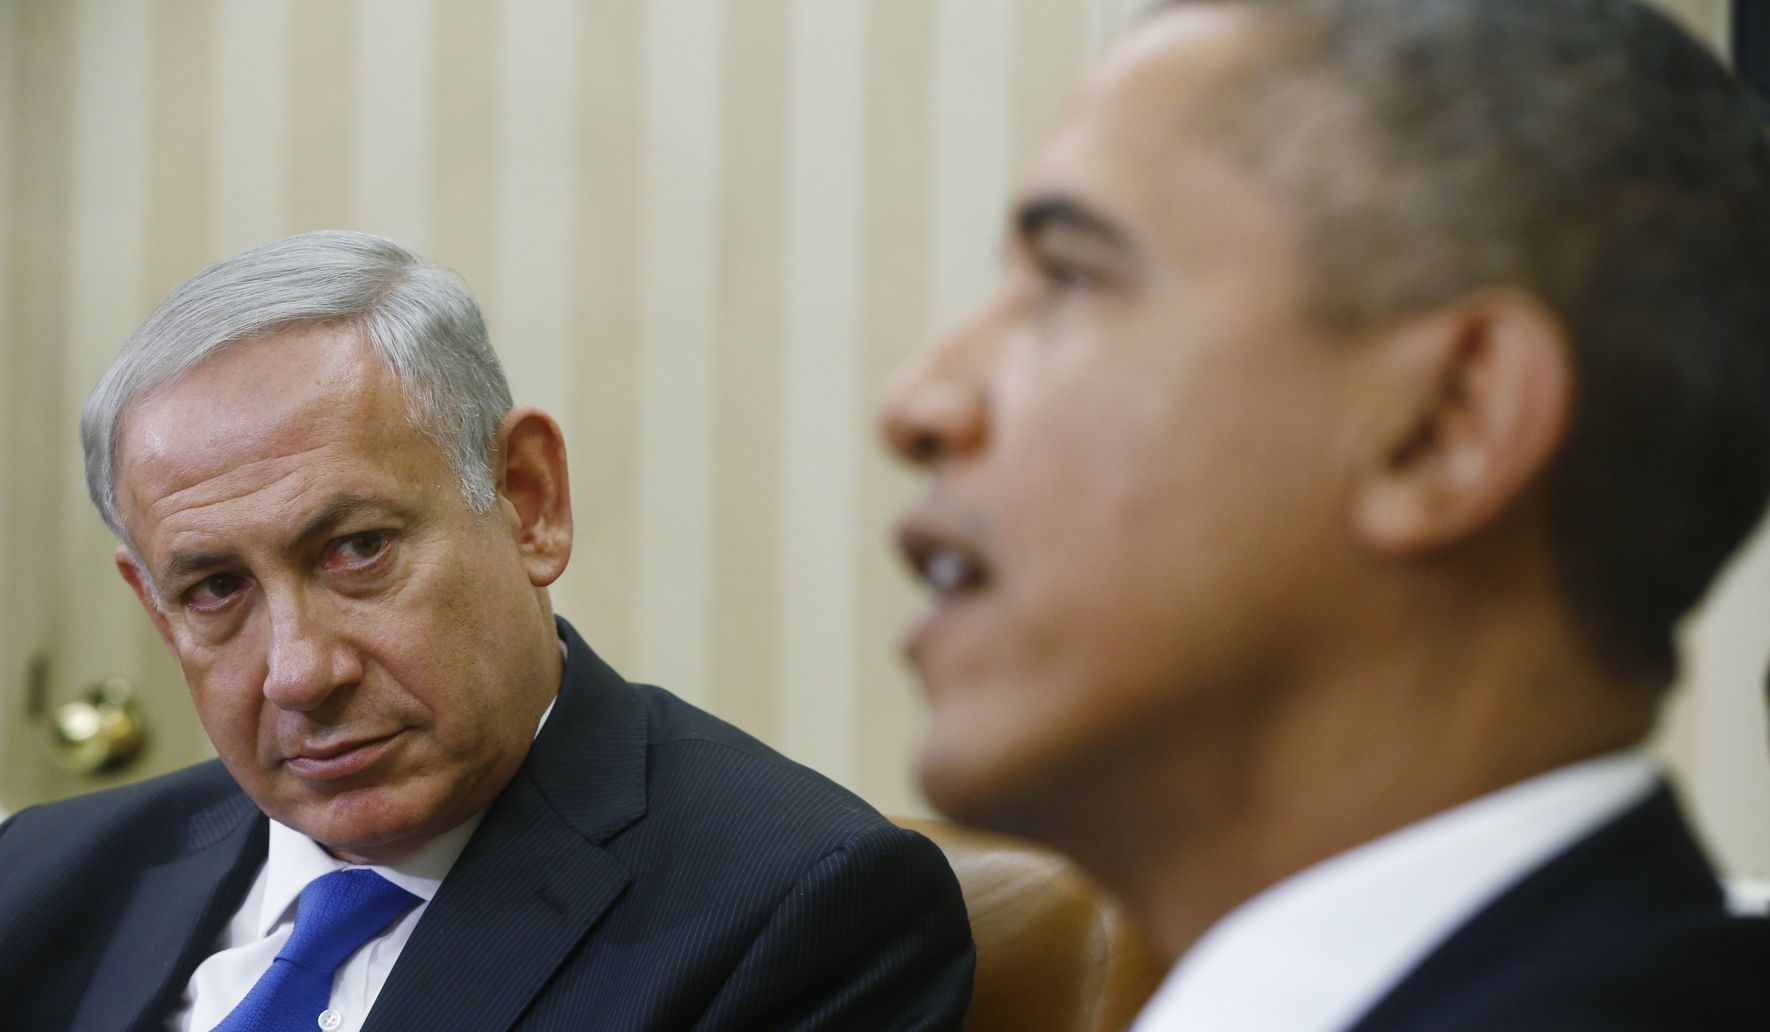 Obama admin. sent taxpayer money to campaign to oust Netanyahu